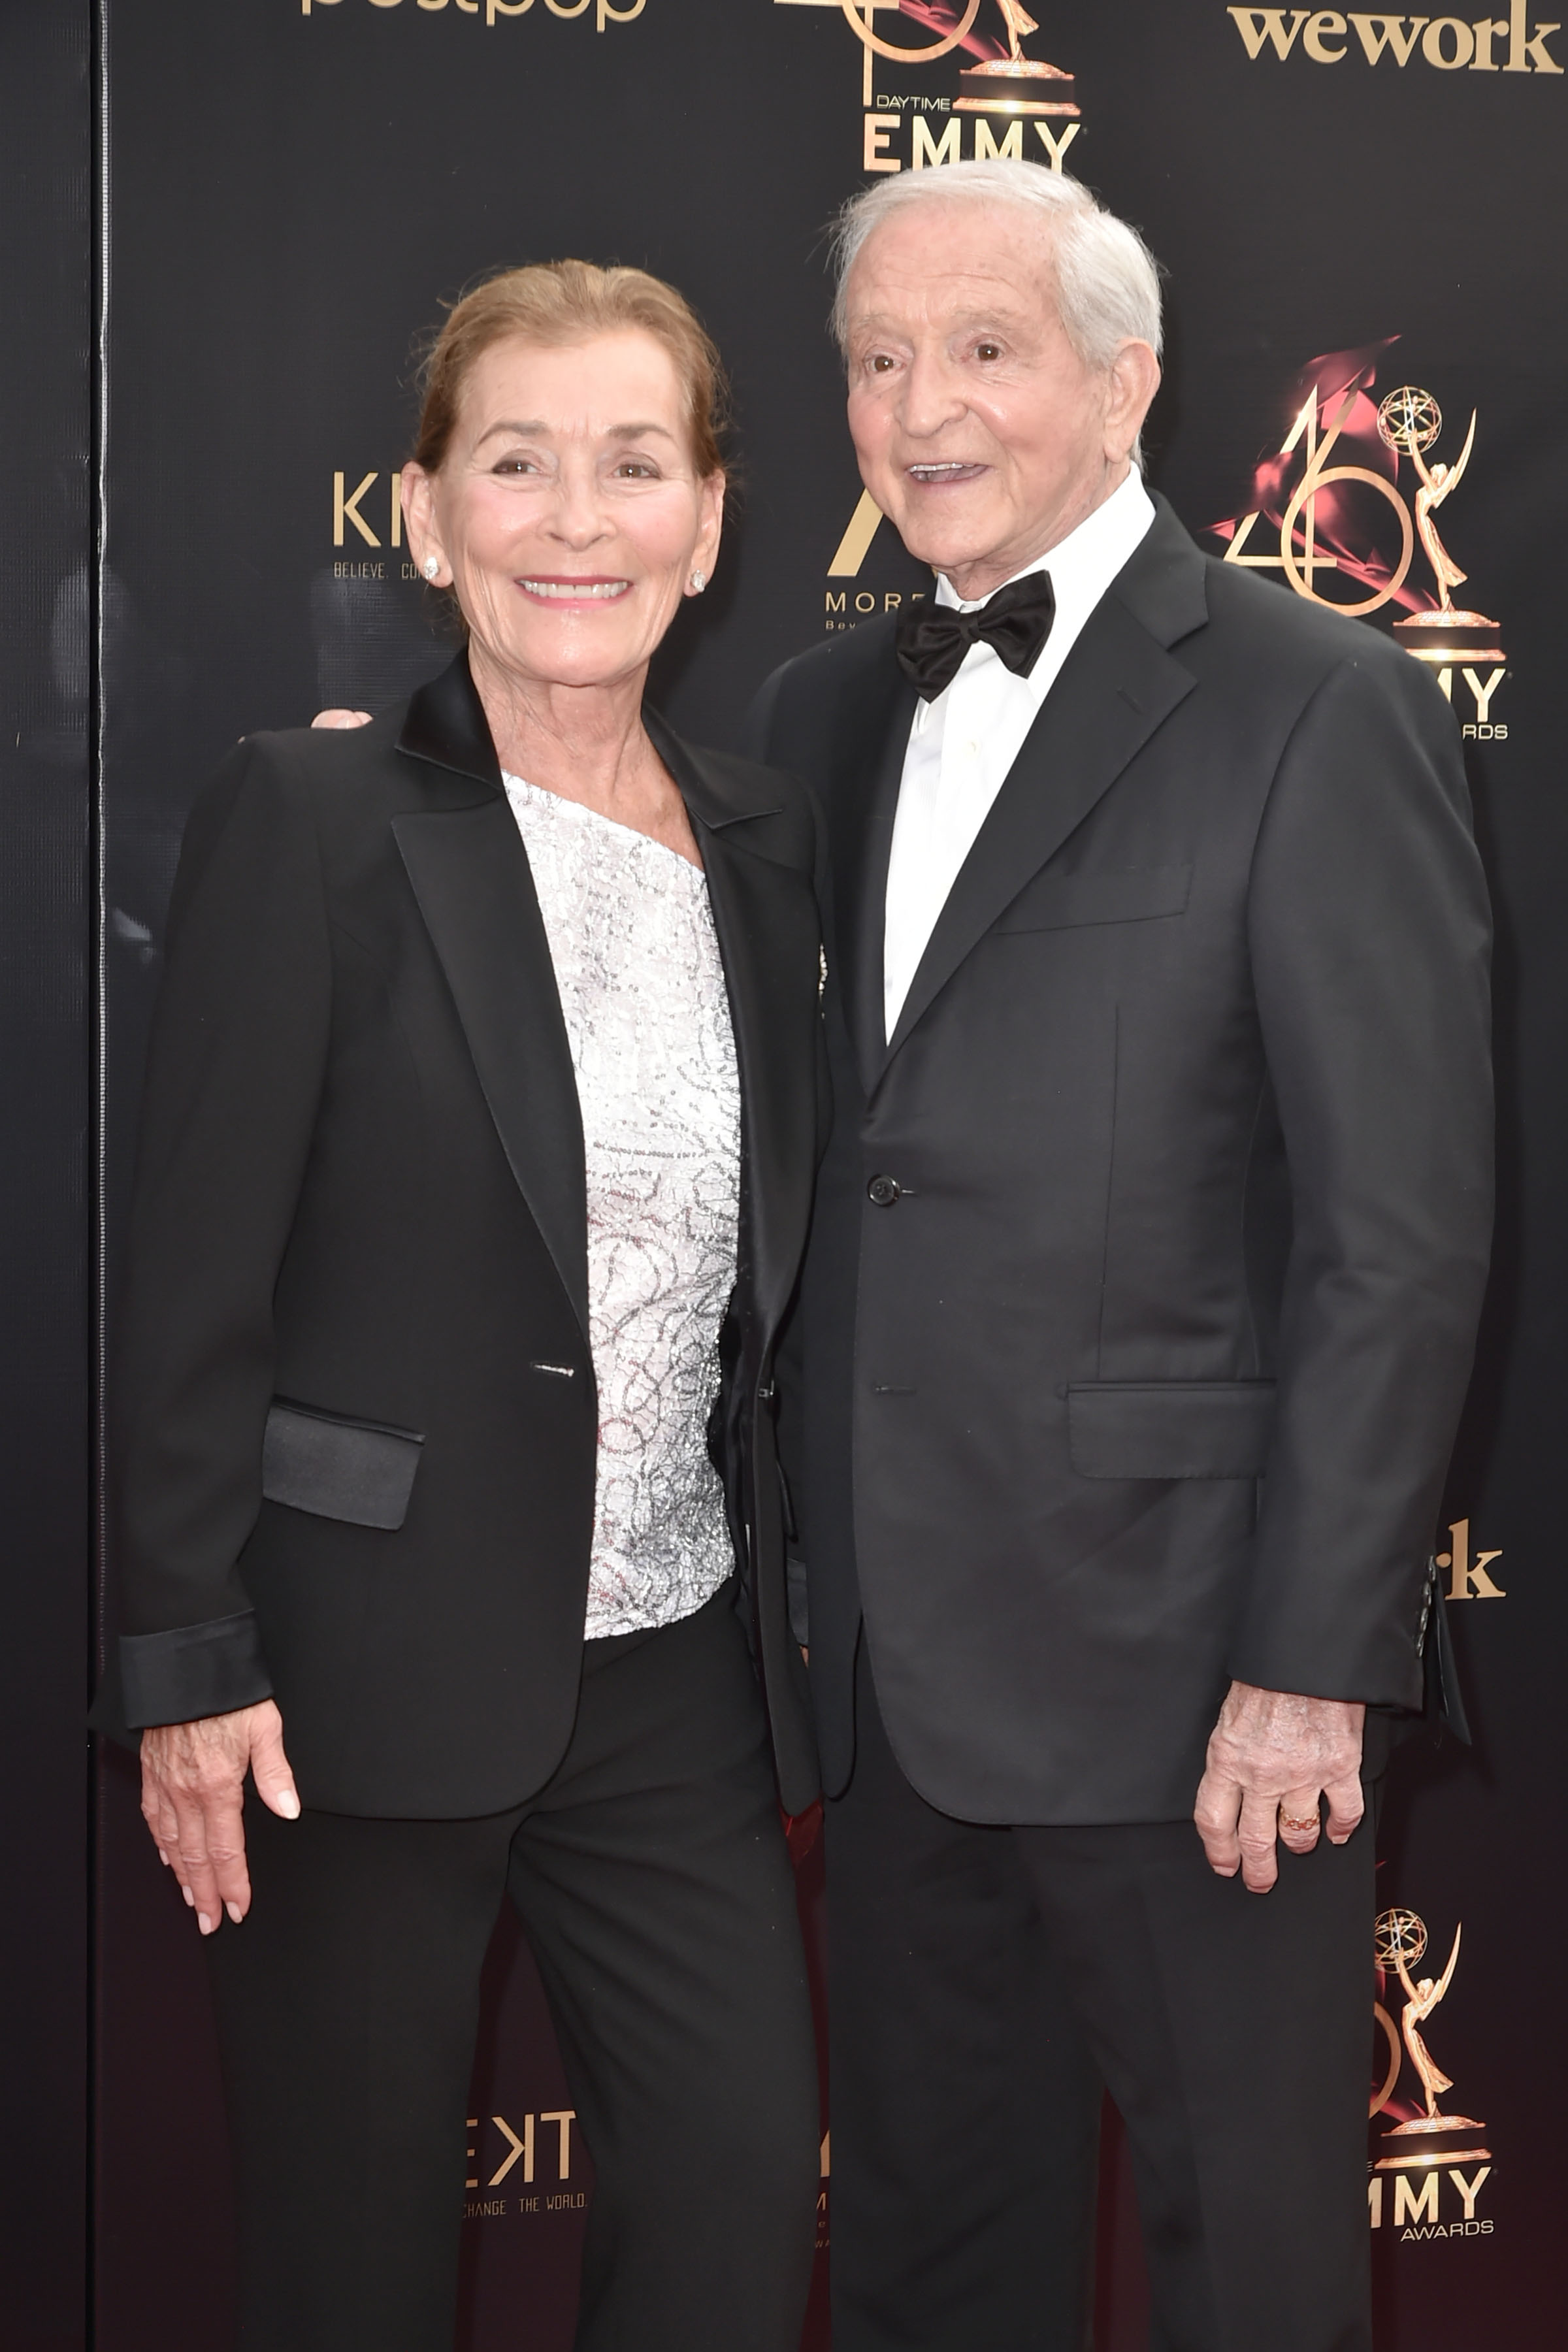 Judge Judy and Jerry Sheindlin at the 46th annual Daytime Emmy Awards on May 5, 2019, in Pasadena, California | Source: Getty Images